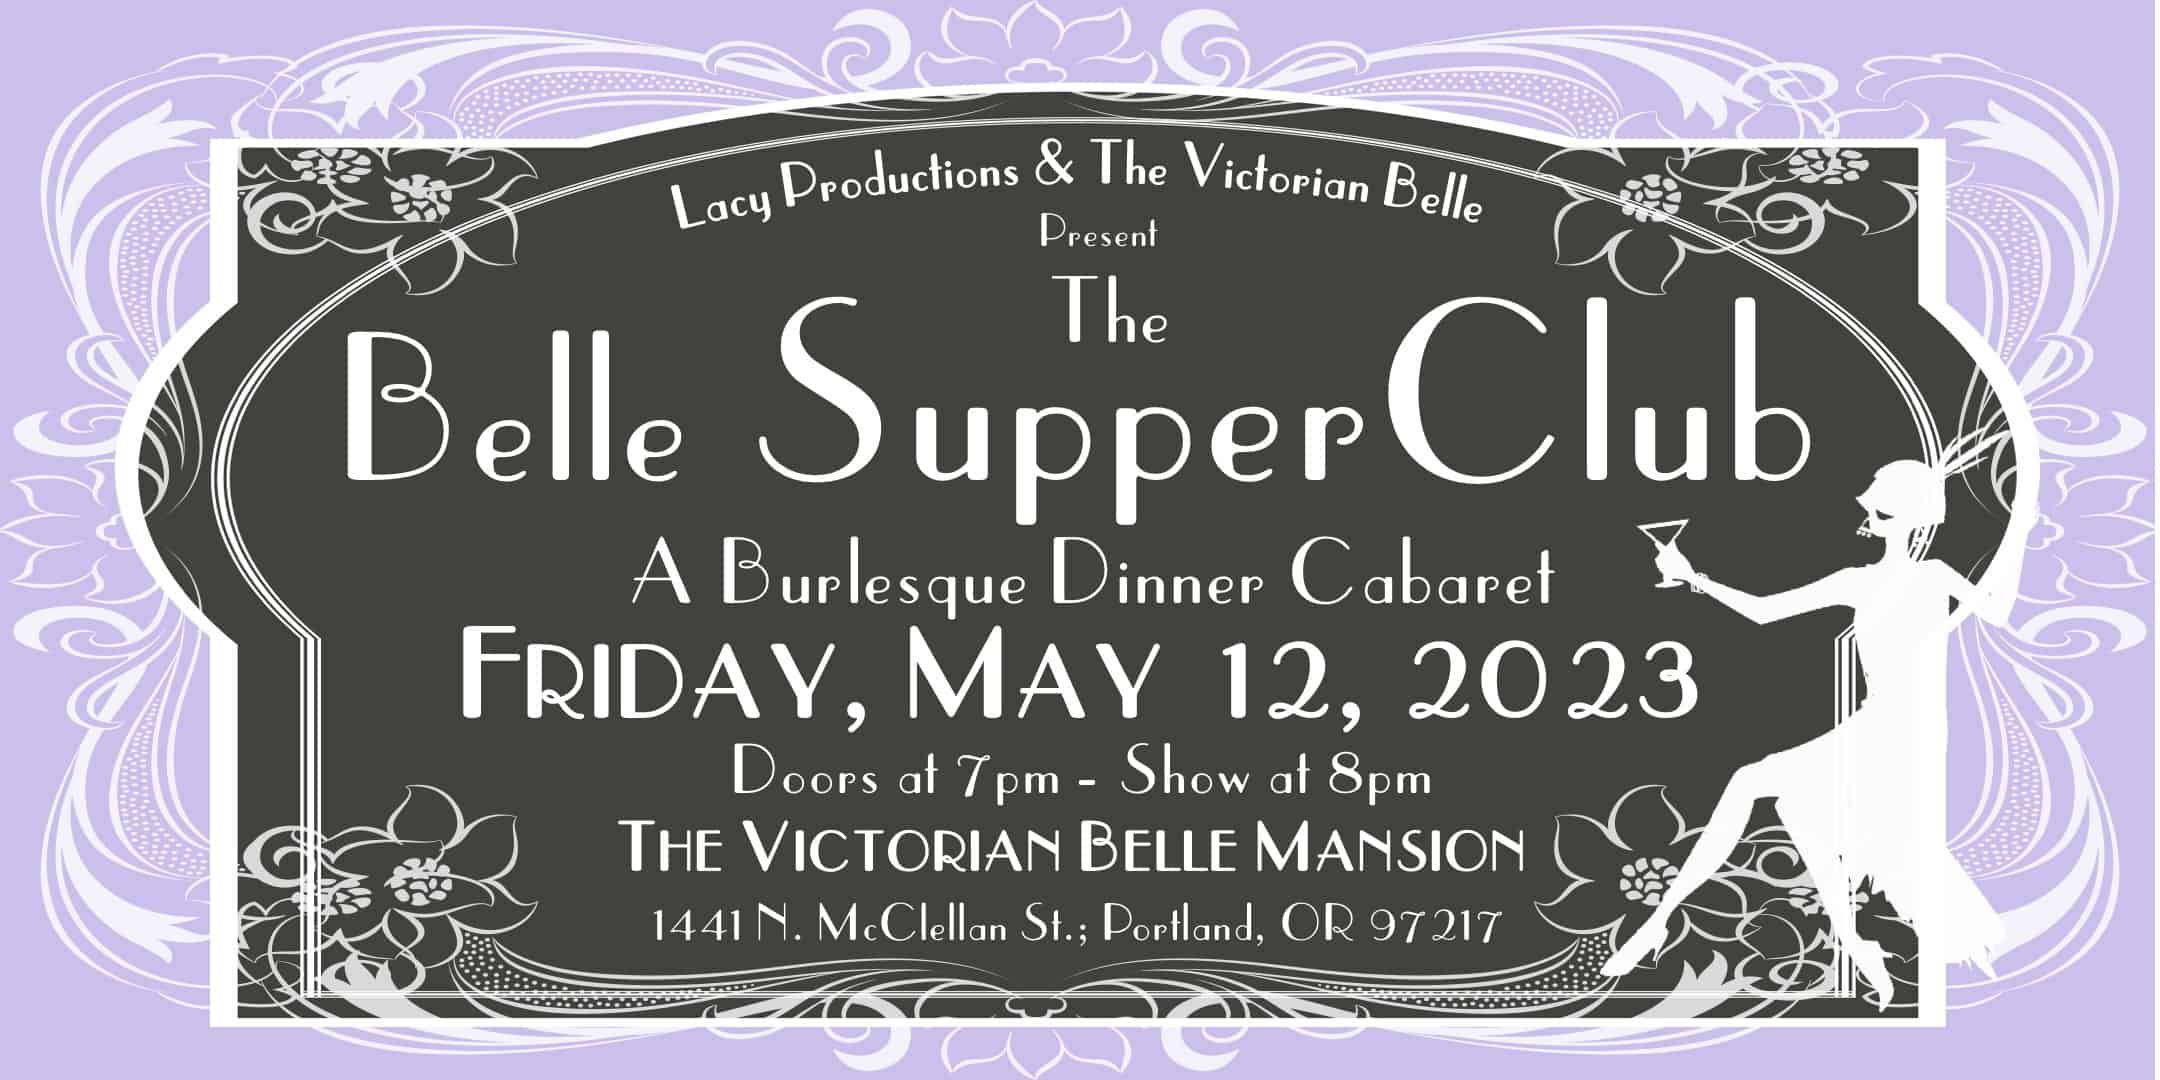 The Belle Supper Club: A Burlesque Dinner Cabaret. Friday, May 12th, 2023. Doors at 7:00 PM. Show at 8:00 PM